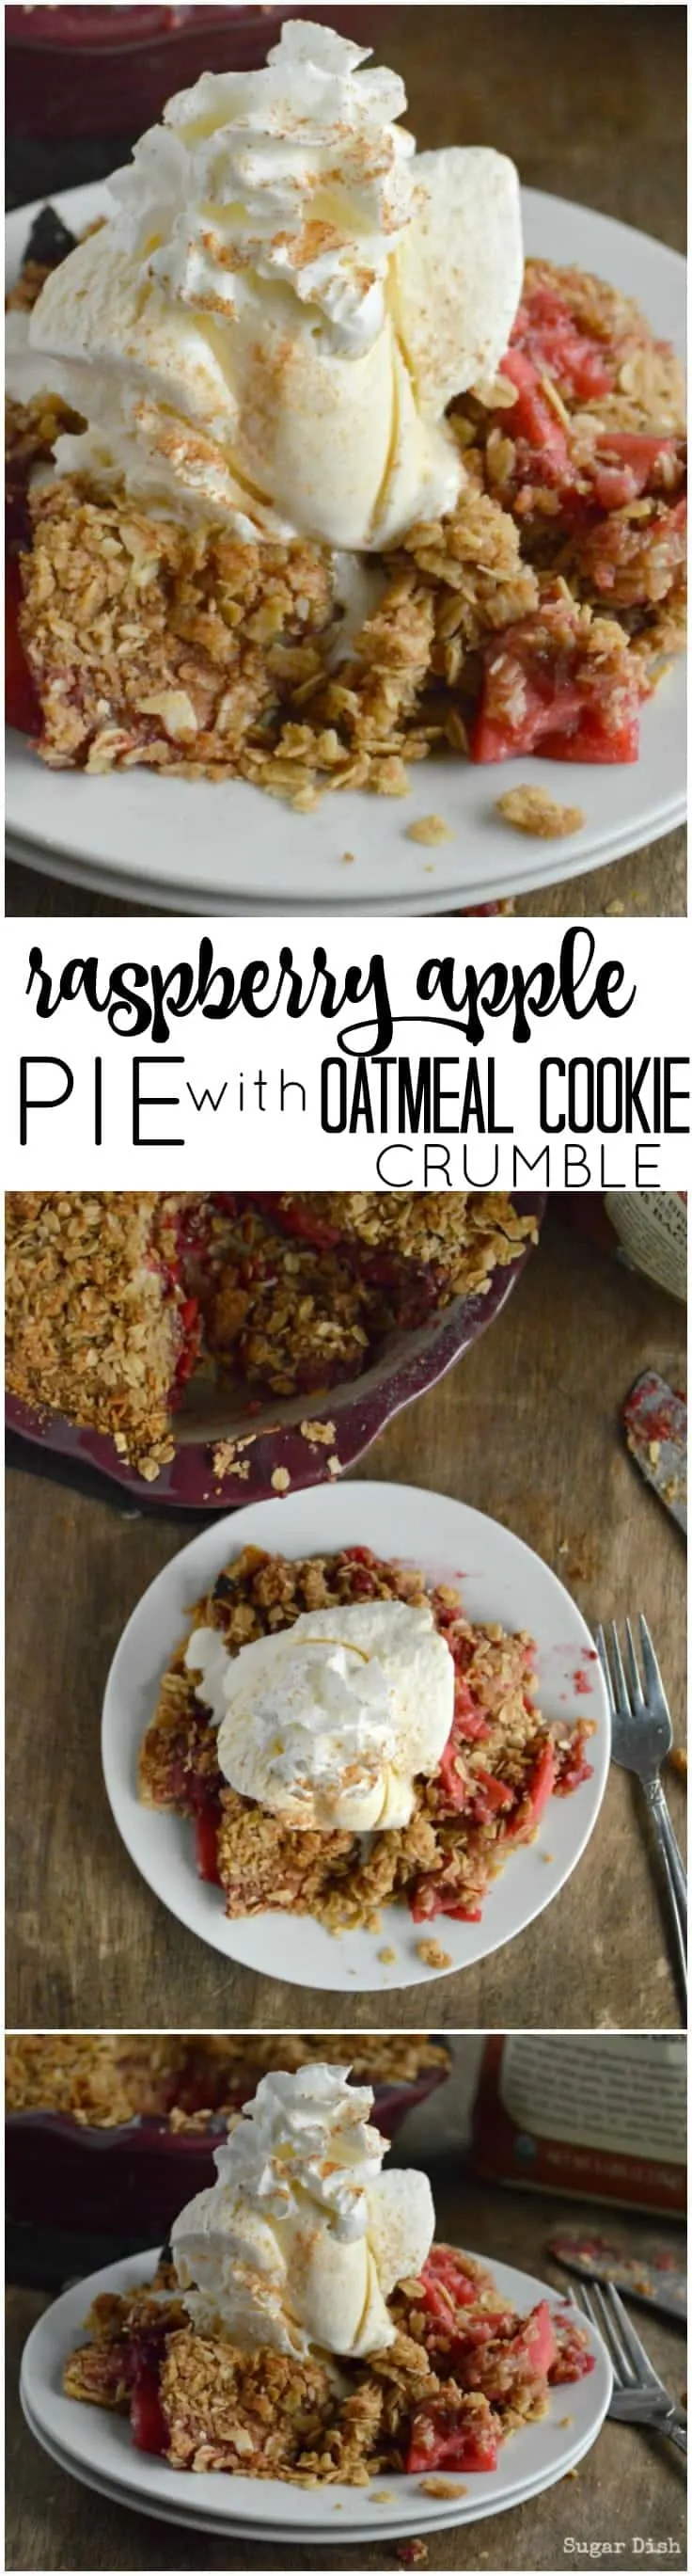 Raspberry Apple Pie with oatmeal Cookie Crumble is a sweet, tart, beautiful fall treat!